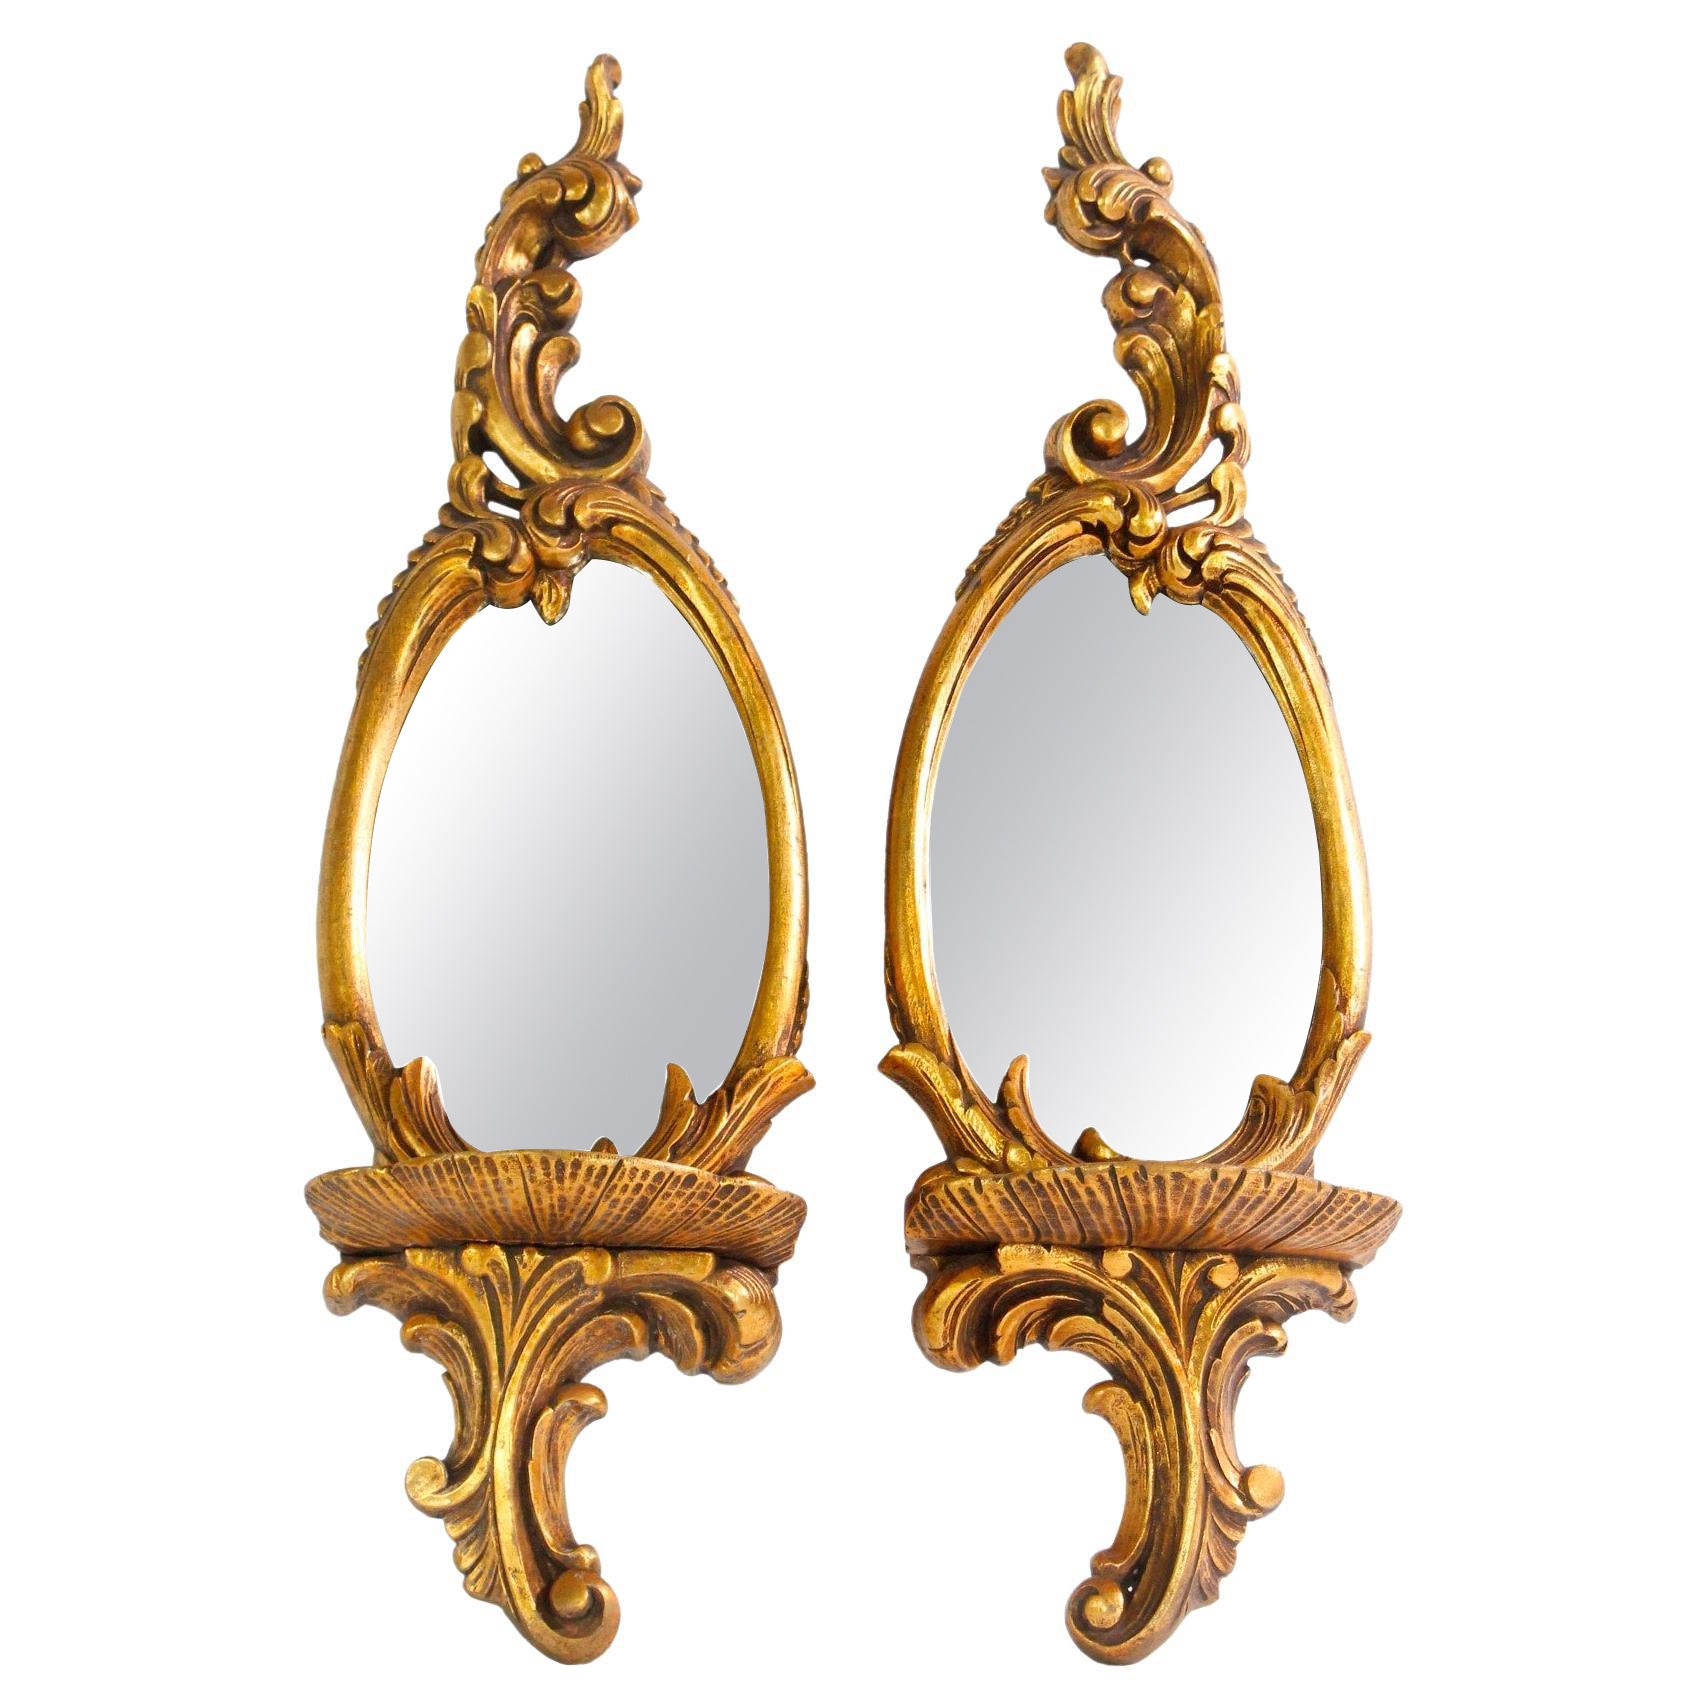 Pair Gold Gilt Wood Wall Mount Mirrors w/ Foliage Detail & Shelves For Sale